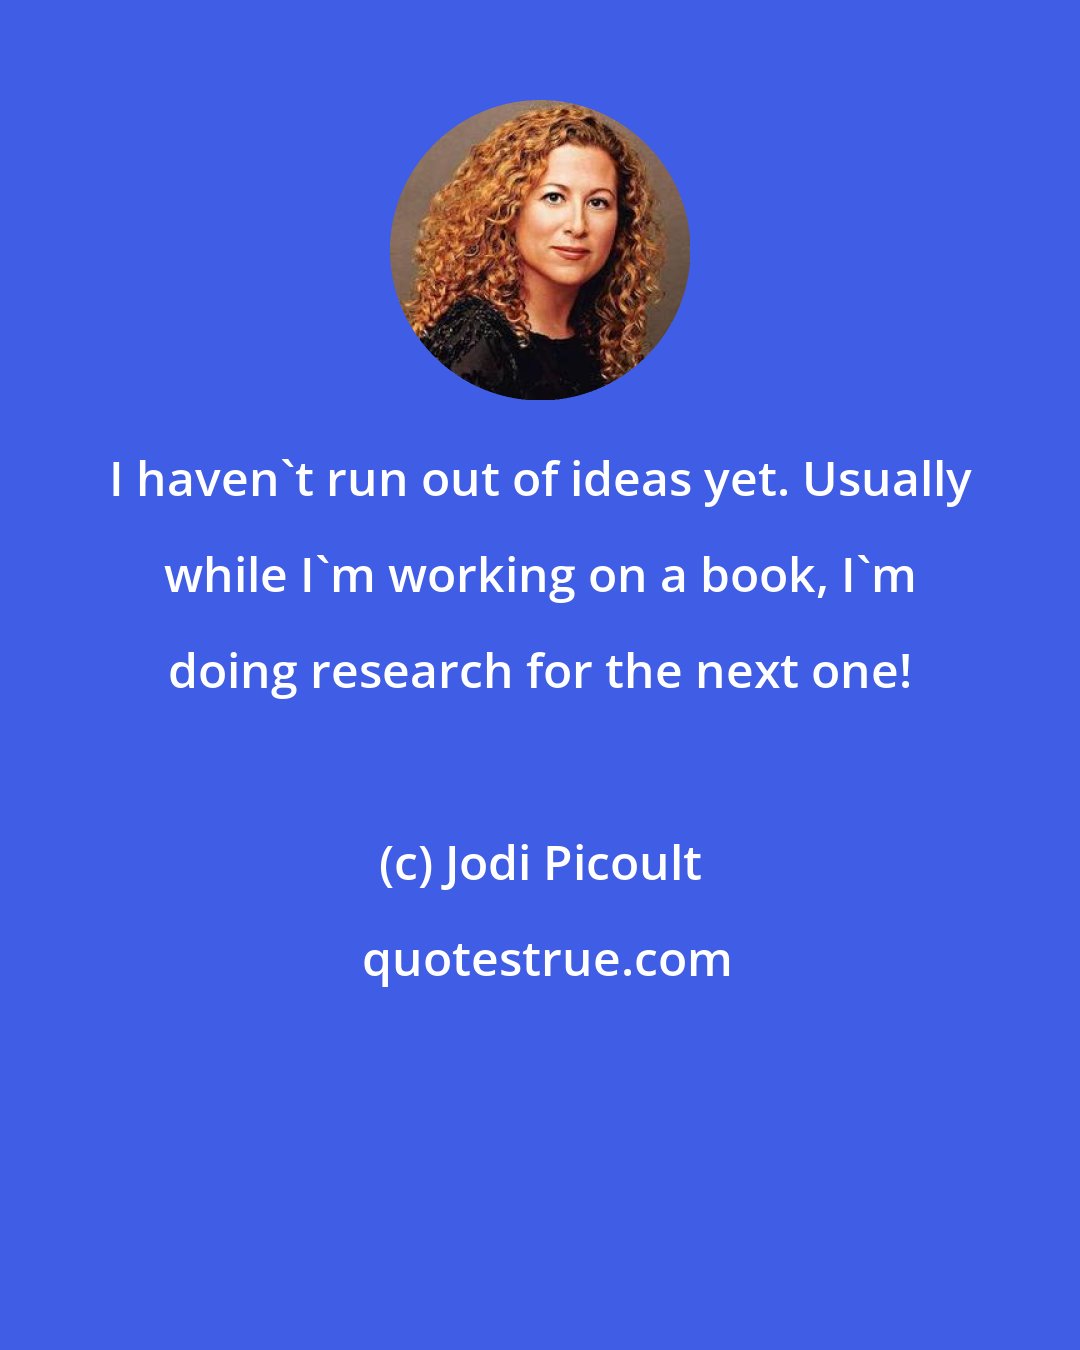 Jodi Picoult: I haven't run out of ideas yet. Usually while I'm working on a book, I'm doing research for the next one!